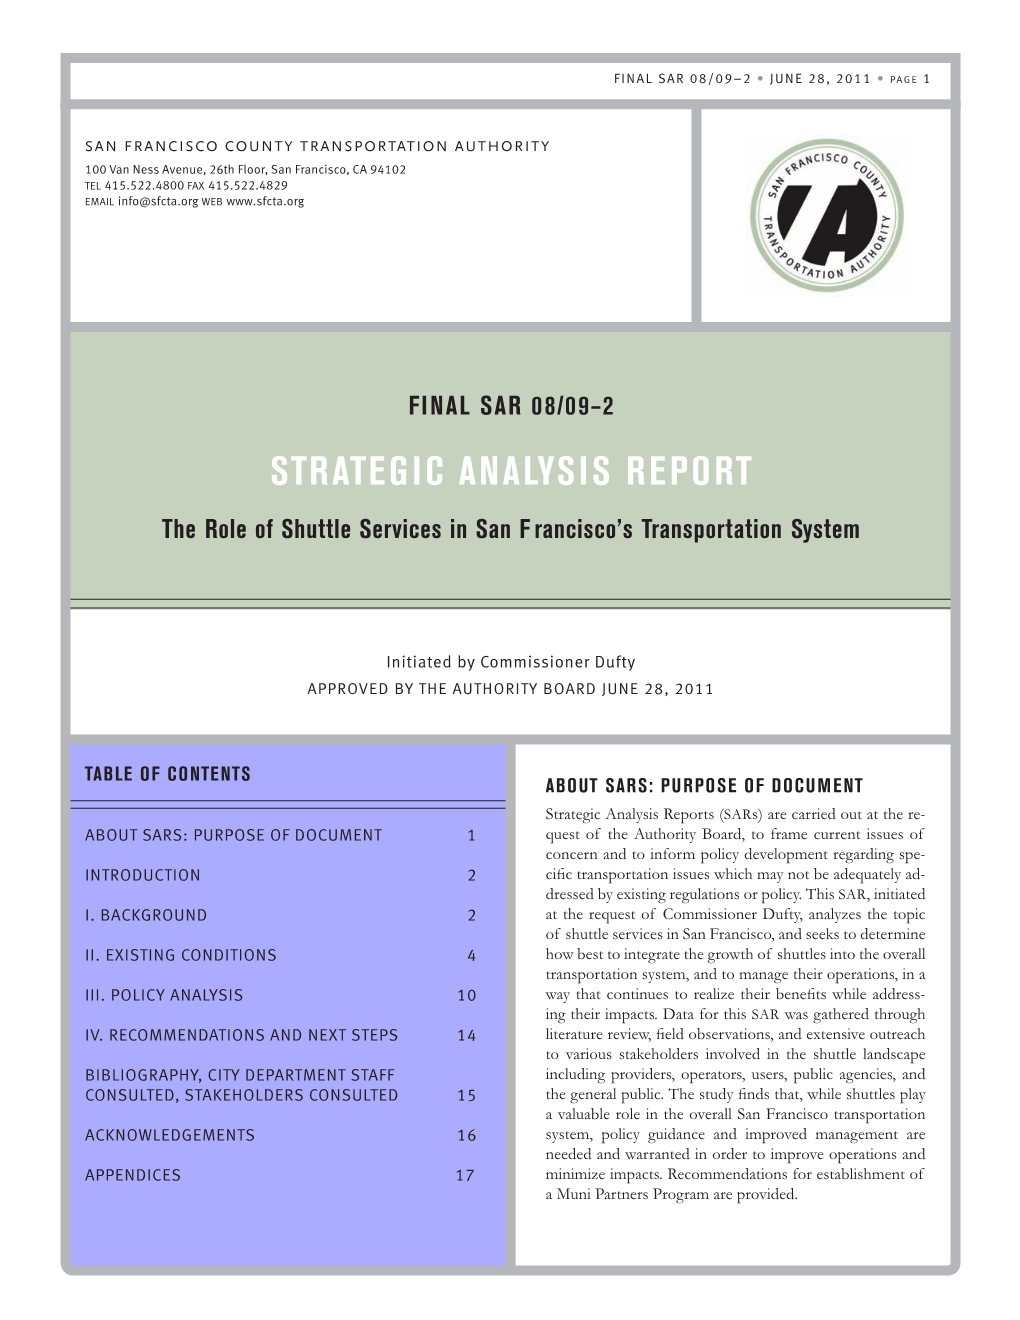 STRATEGIC ANALYSIS REPORT the Role of Shuttle Services in San F Rancisco’S Transportation System